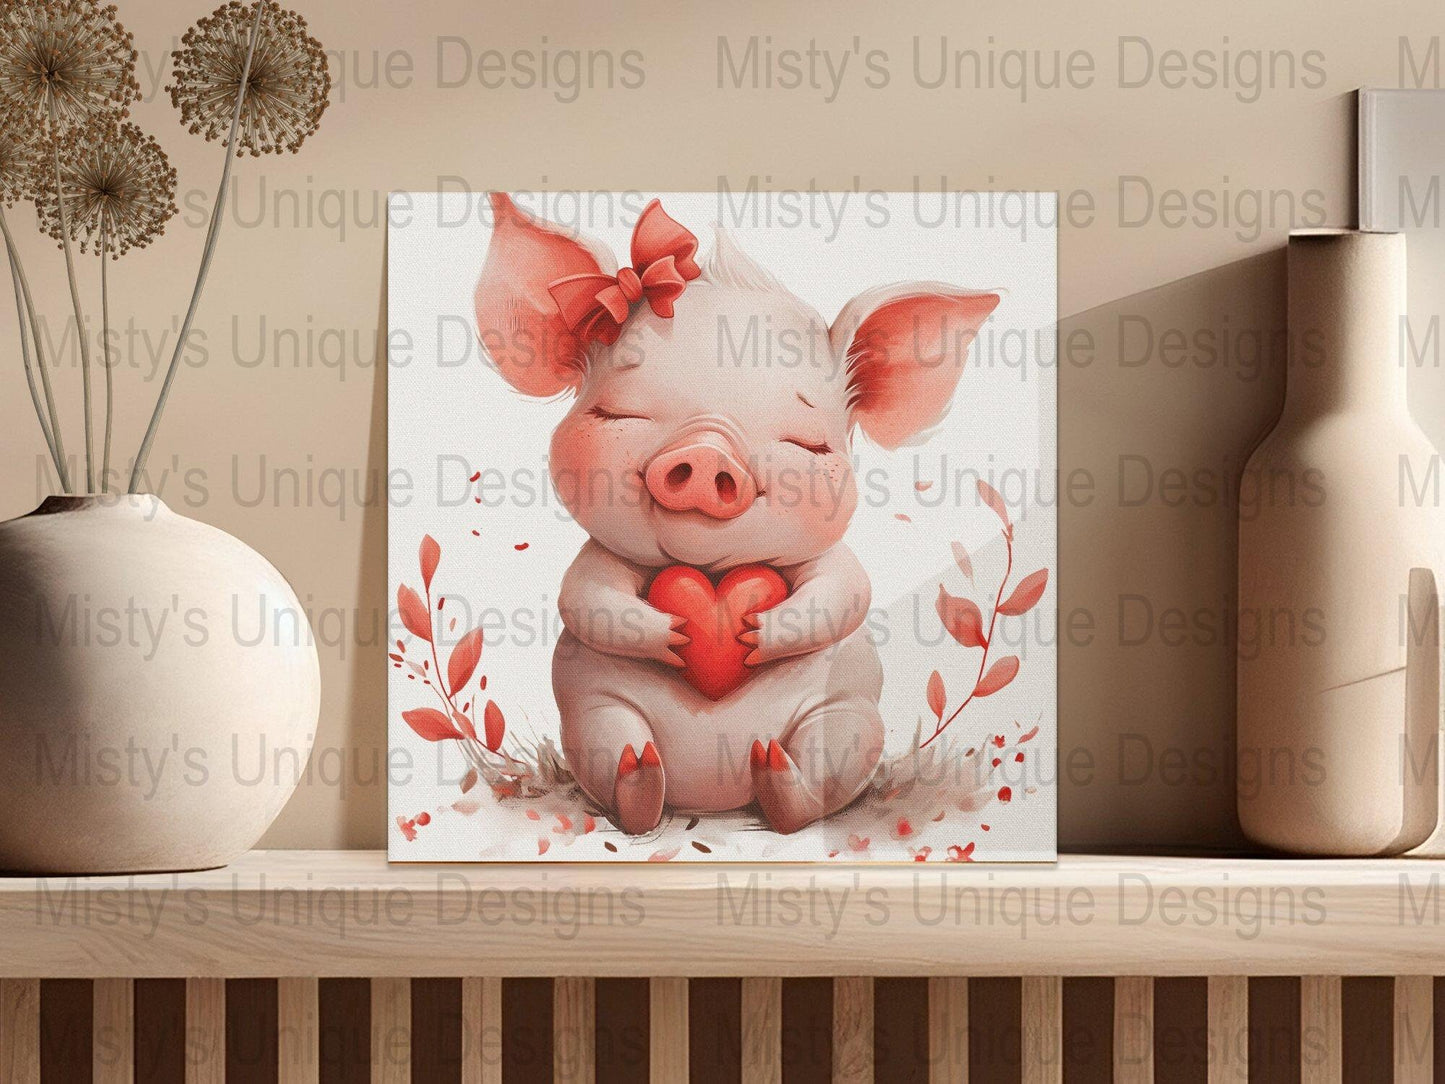 Cute Pig Clipart with Heart PNG, Instant Download Digital Art, Animal Love Illustration, Valentine&#39;s Day Decor, Scrapbooking Supplies